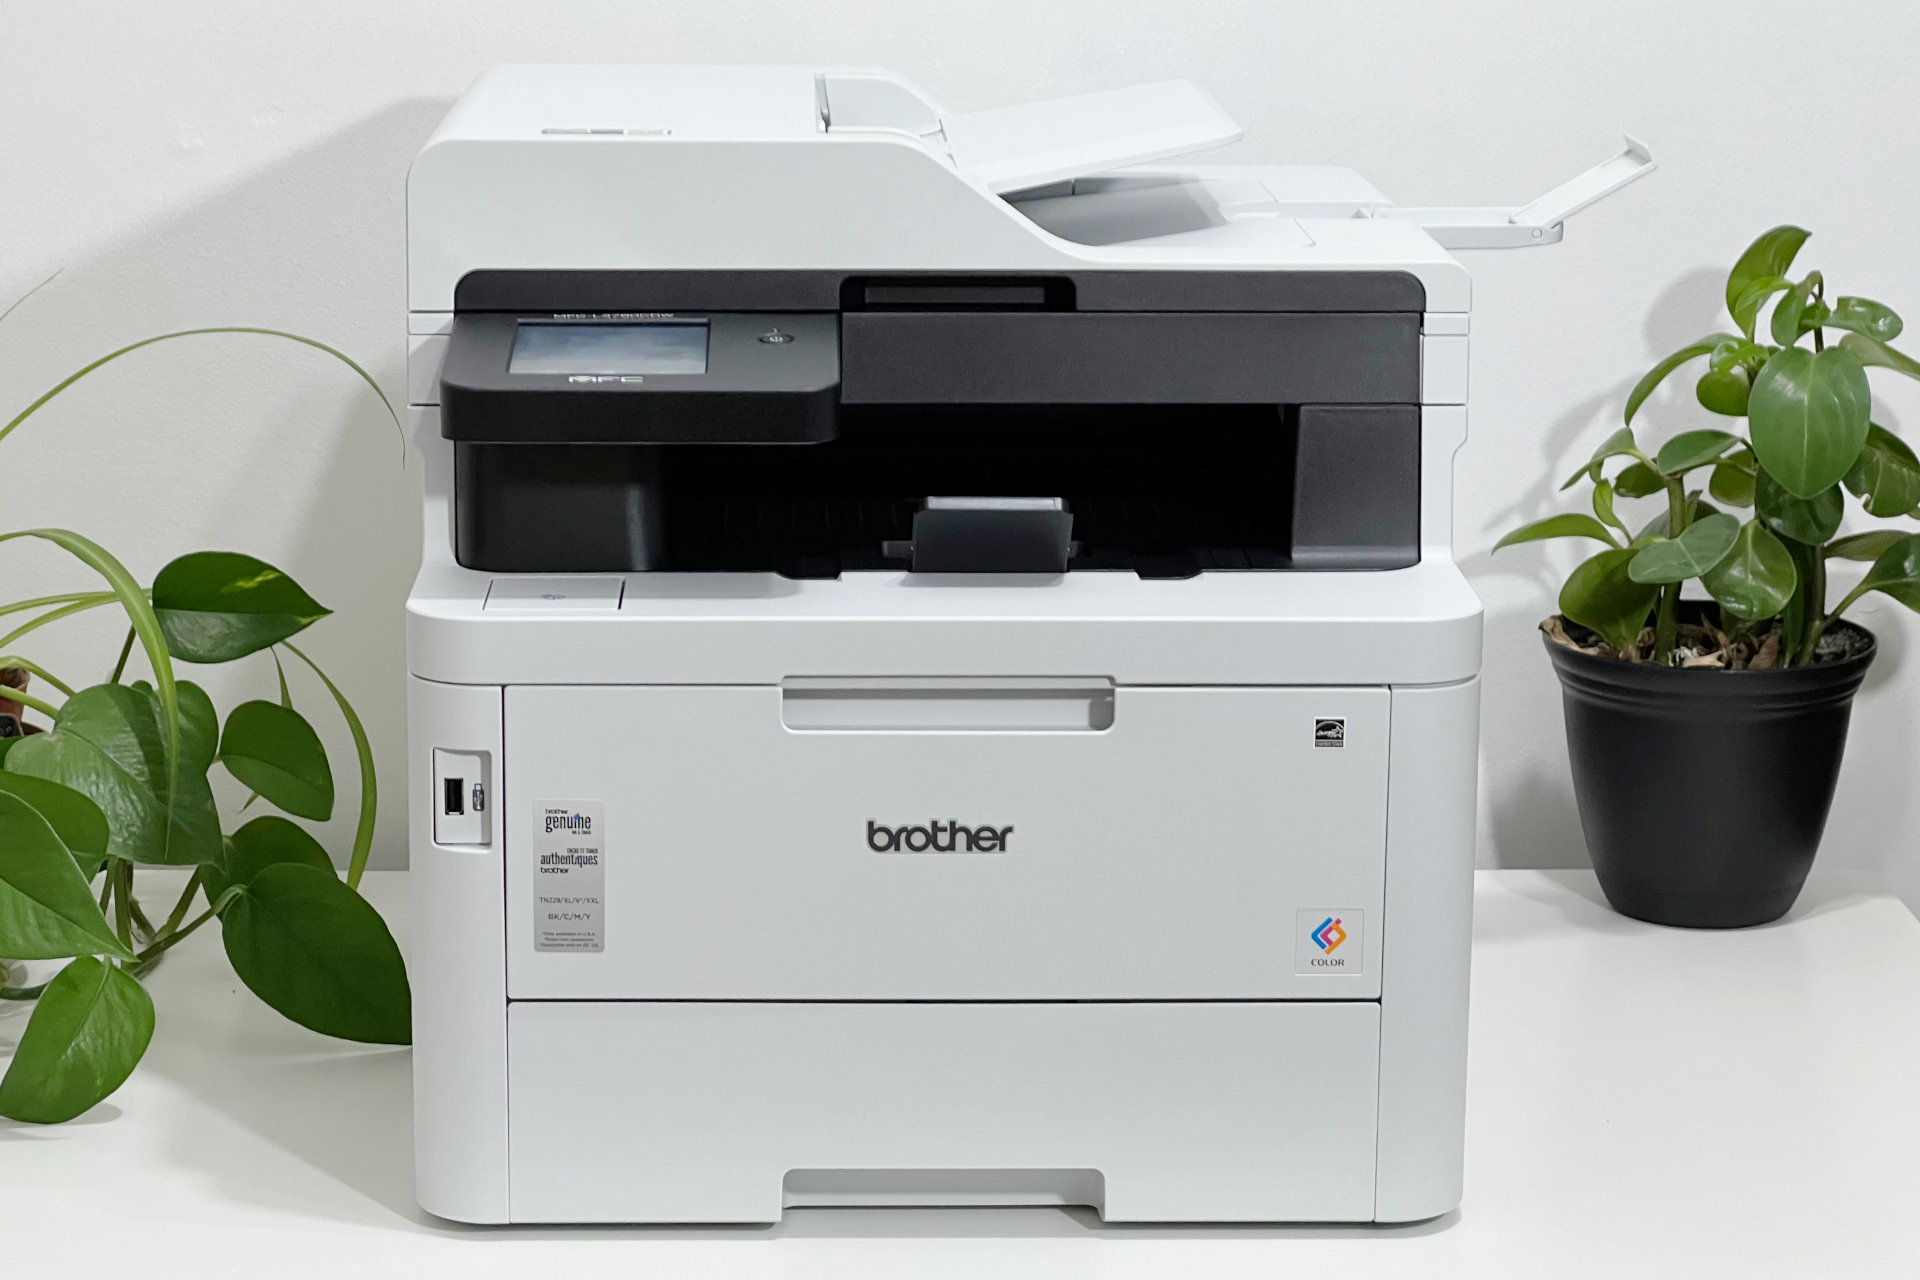 Brother MFC-L3780CDW review: quick color